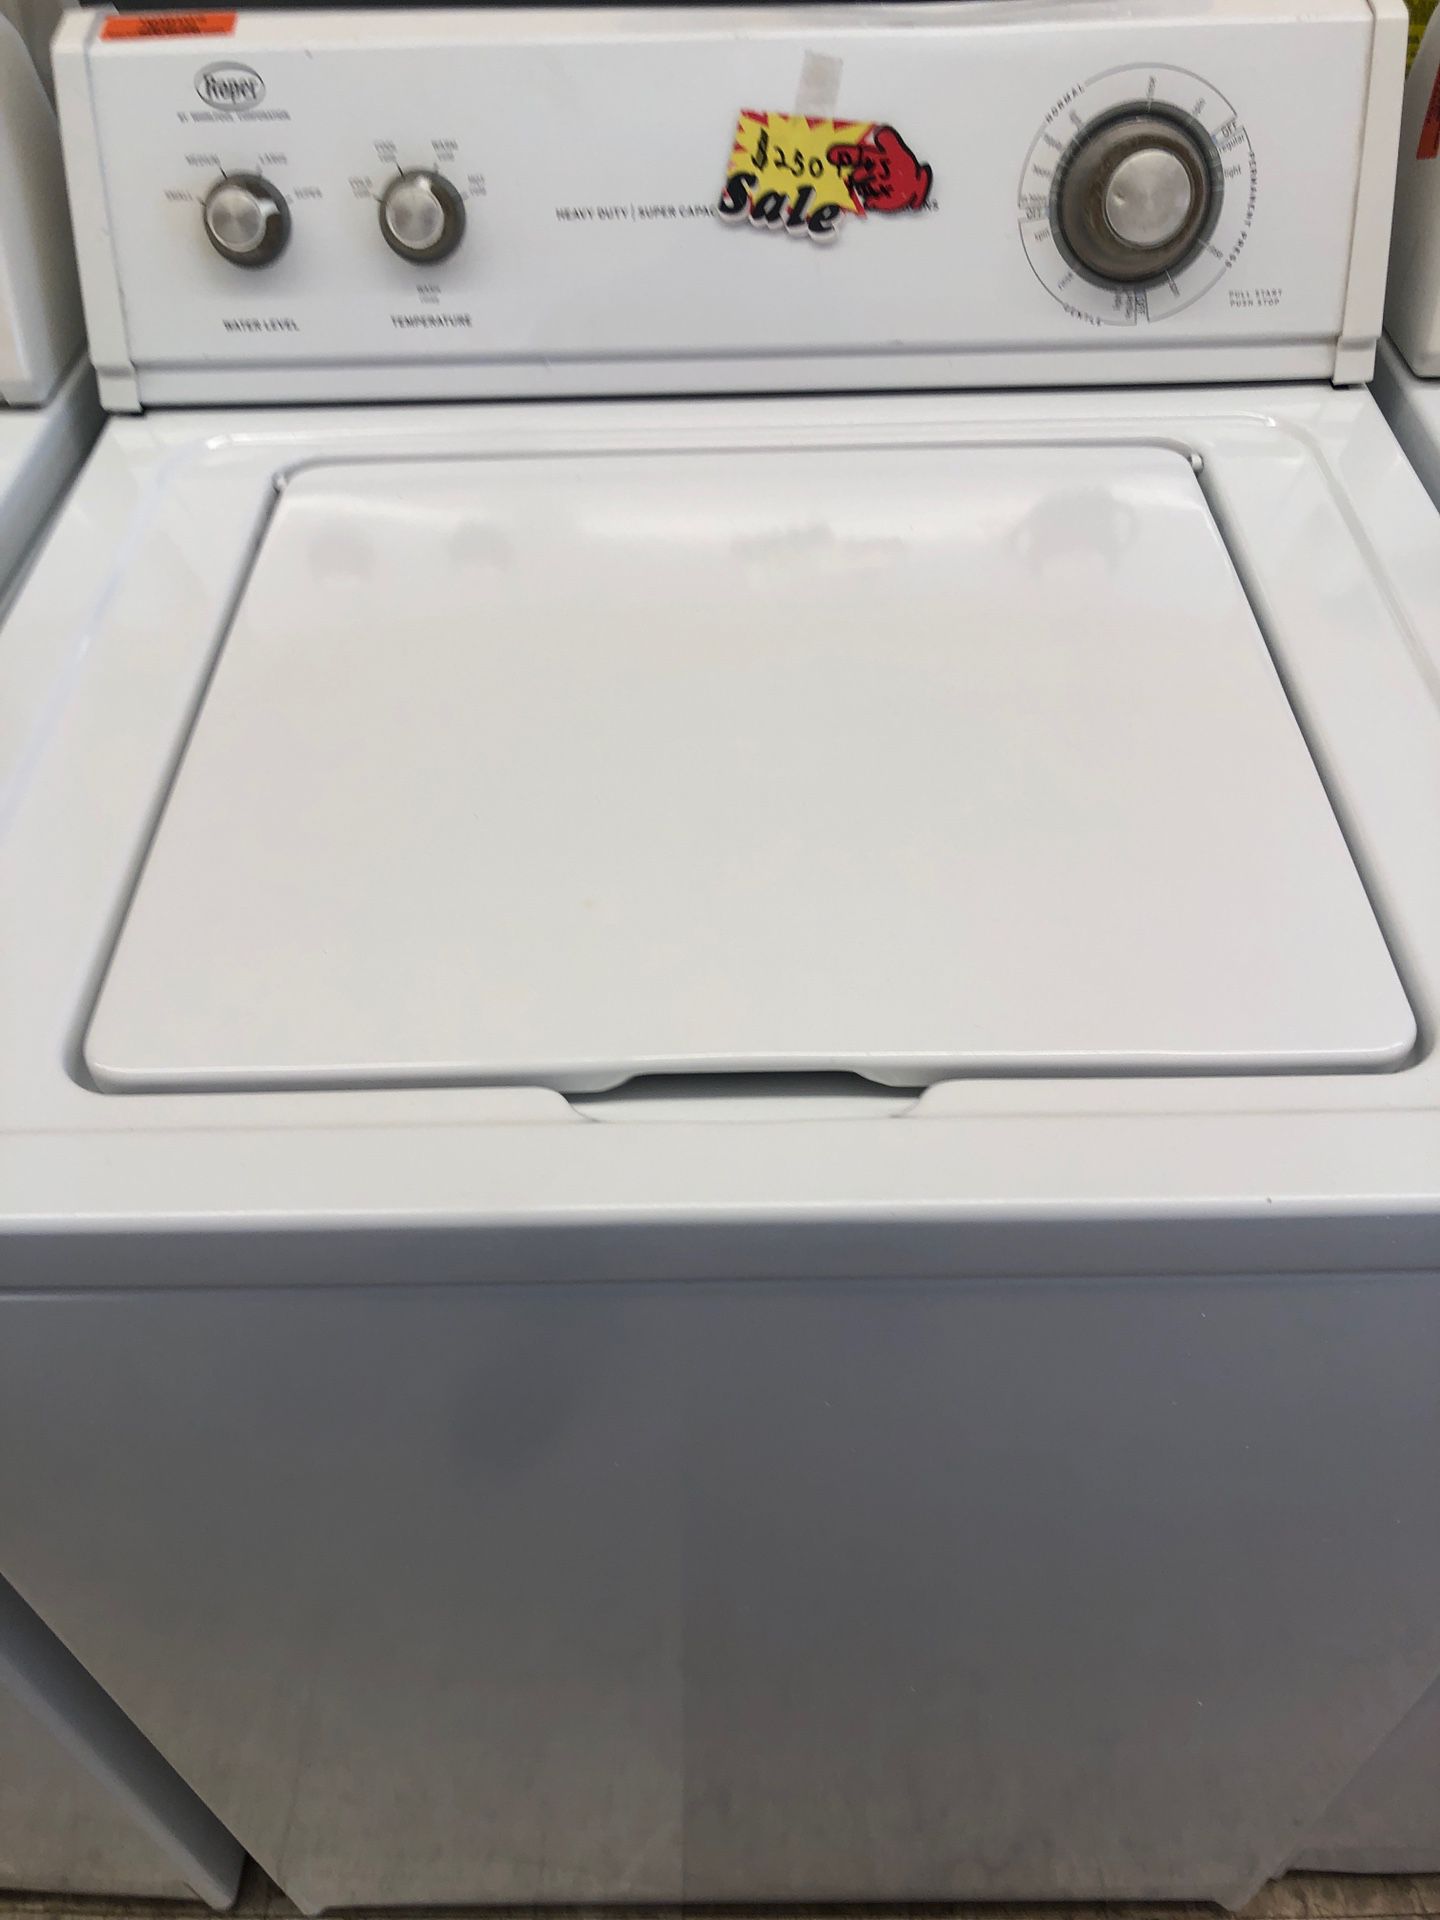 Roper by whirlpool washer